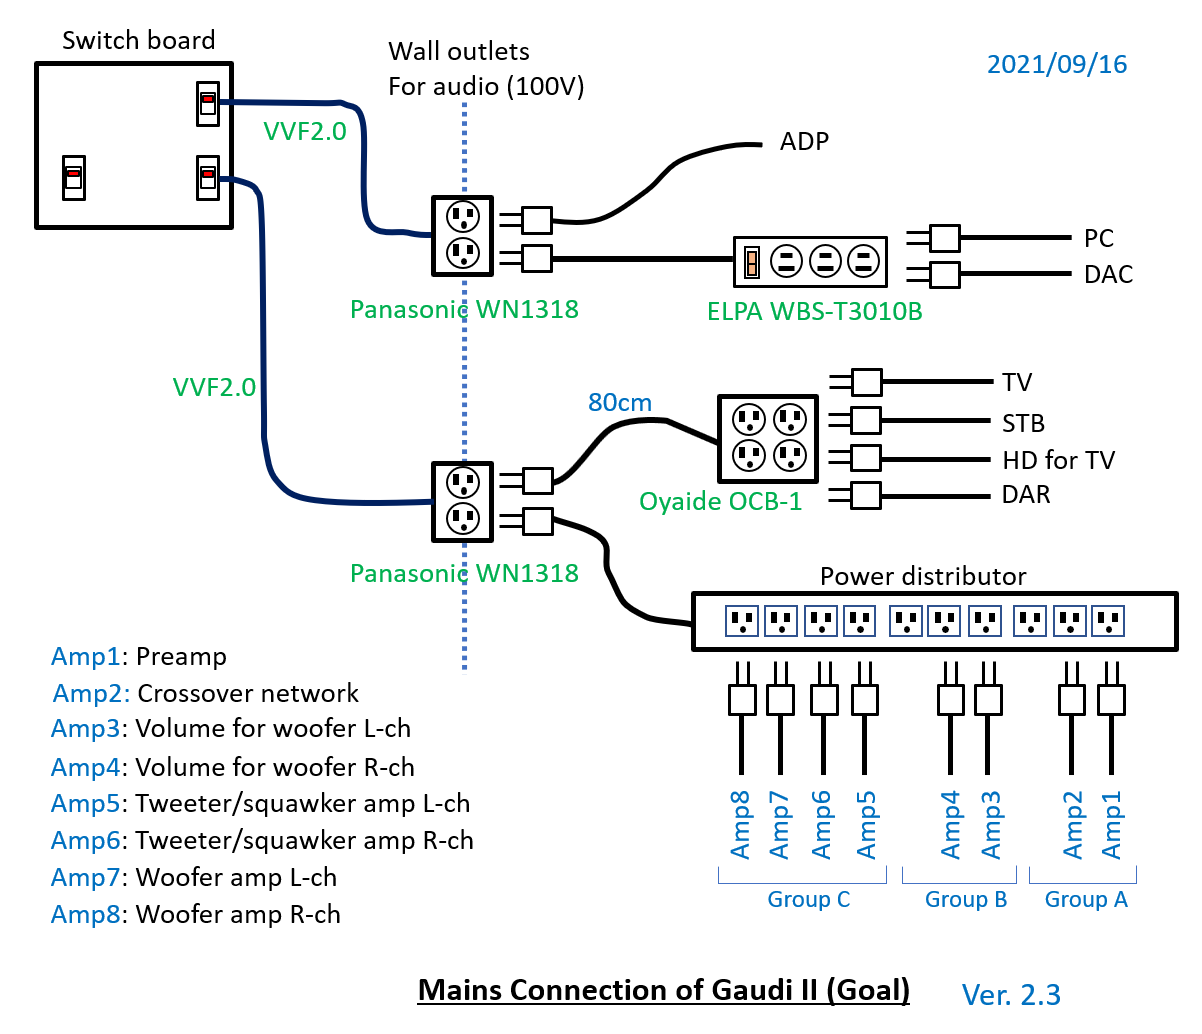 Gaudi II - Mains connection Ver.2.3